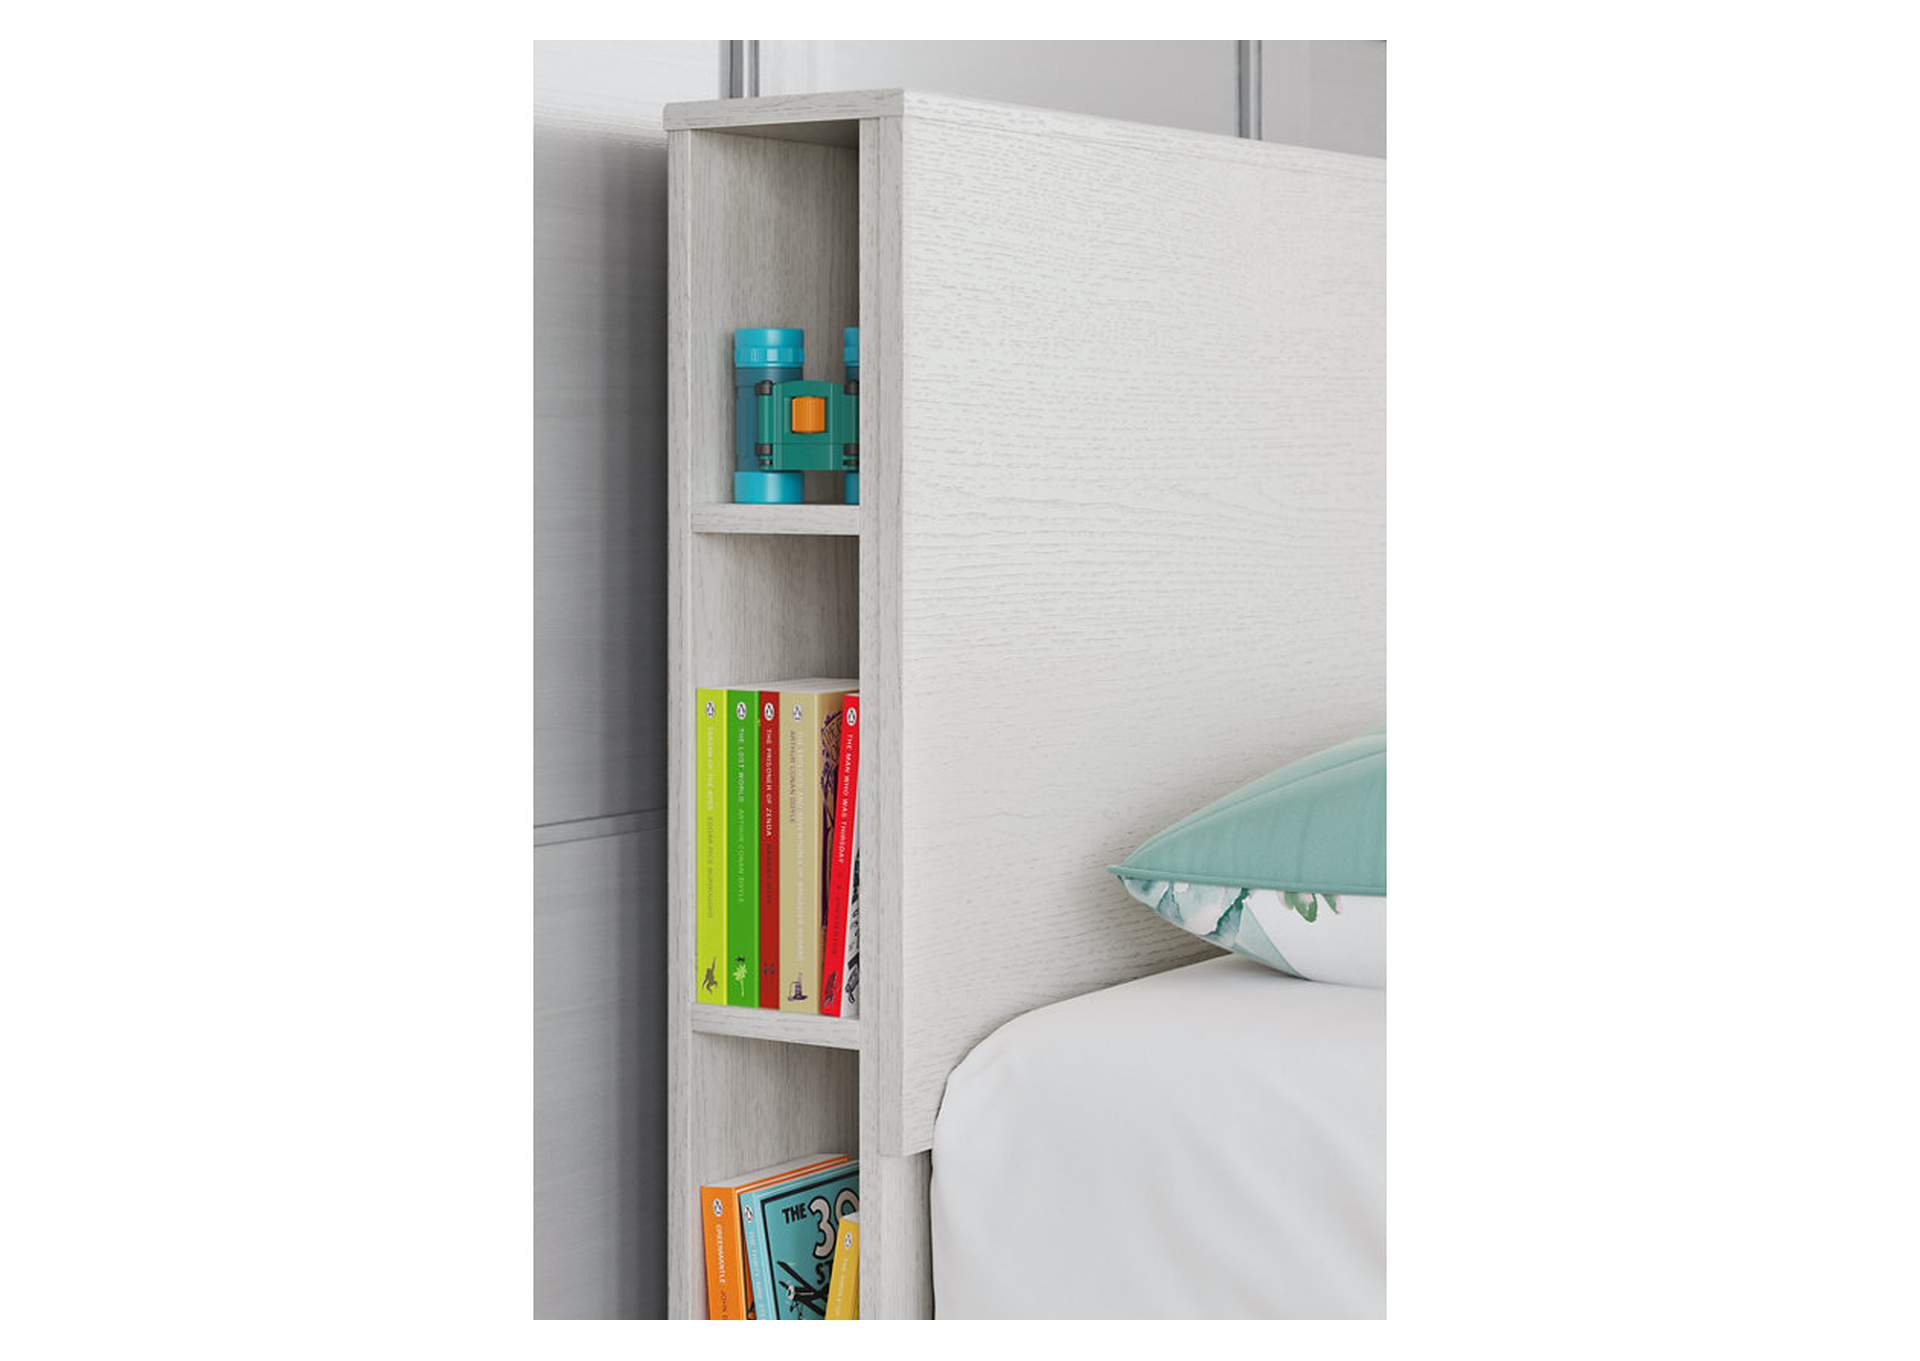 Aprilyn Twin Bookcase Bed,Signature Design By Ashley